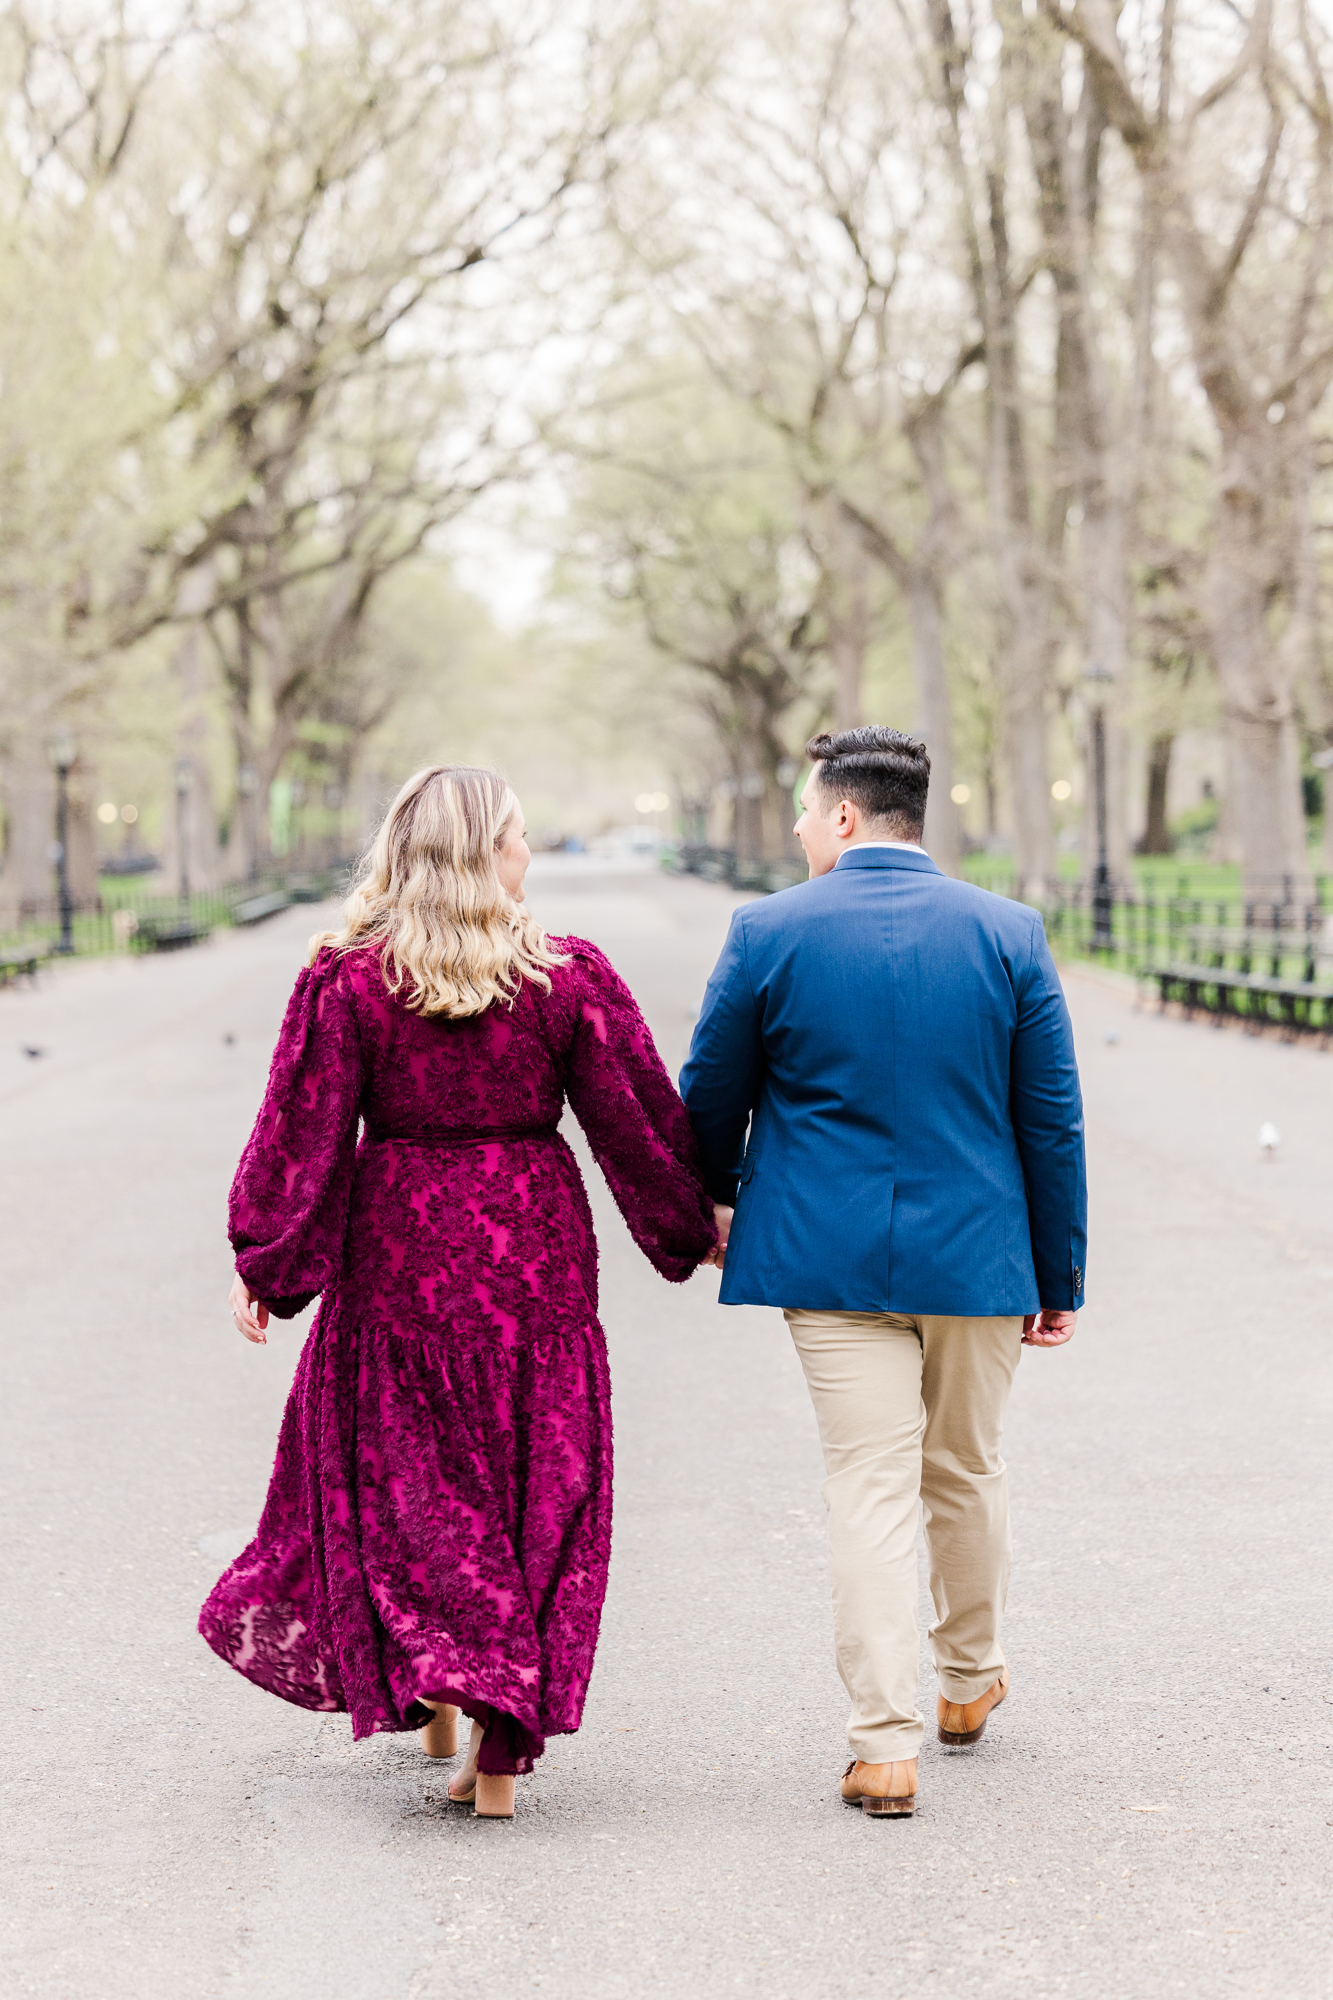 Bright Engagement Pictures in Central Park